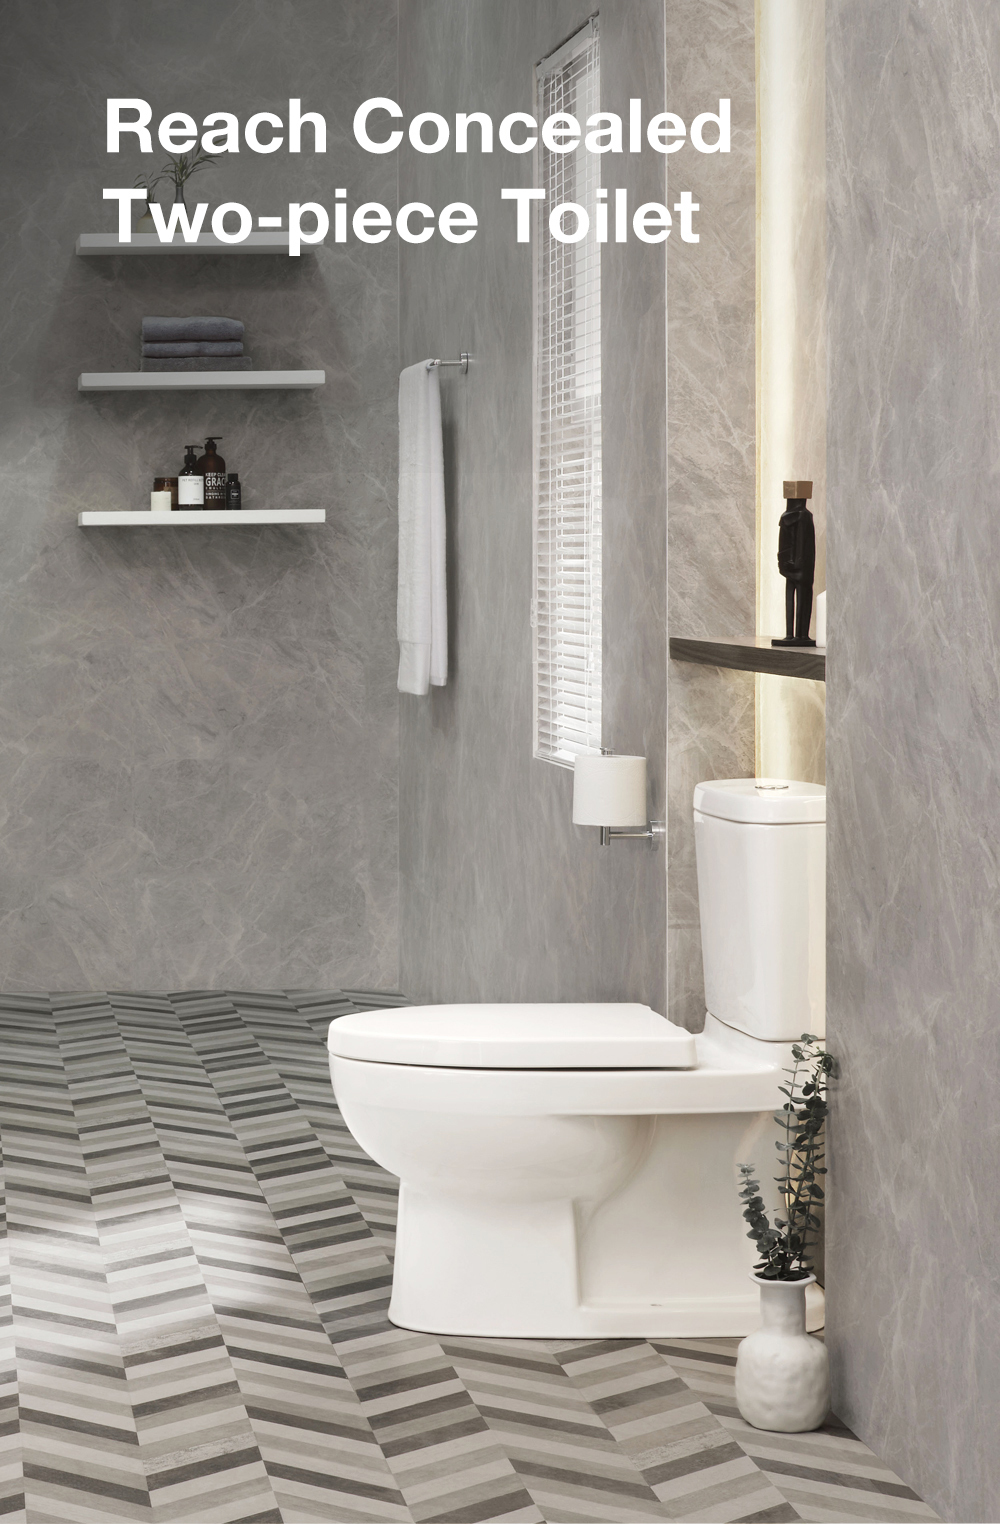 Reach Concealed Two-piece Toilet